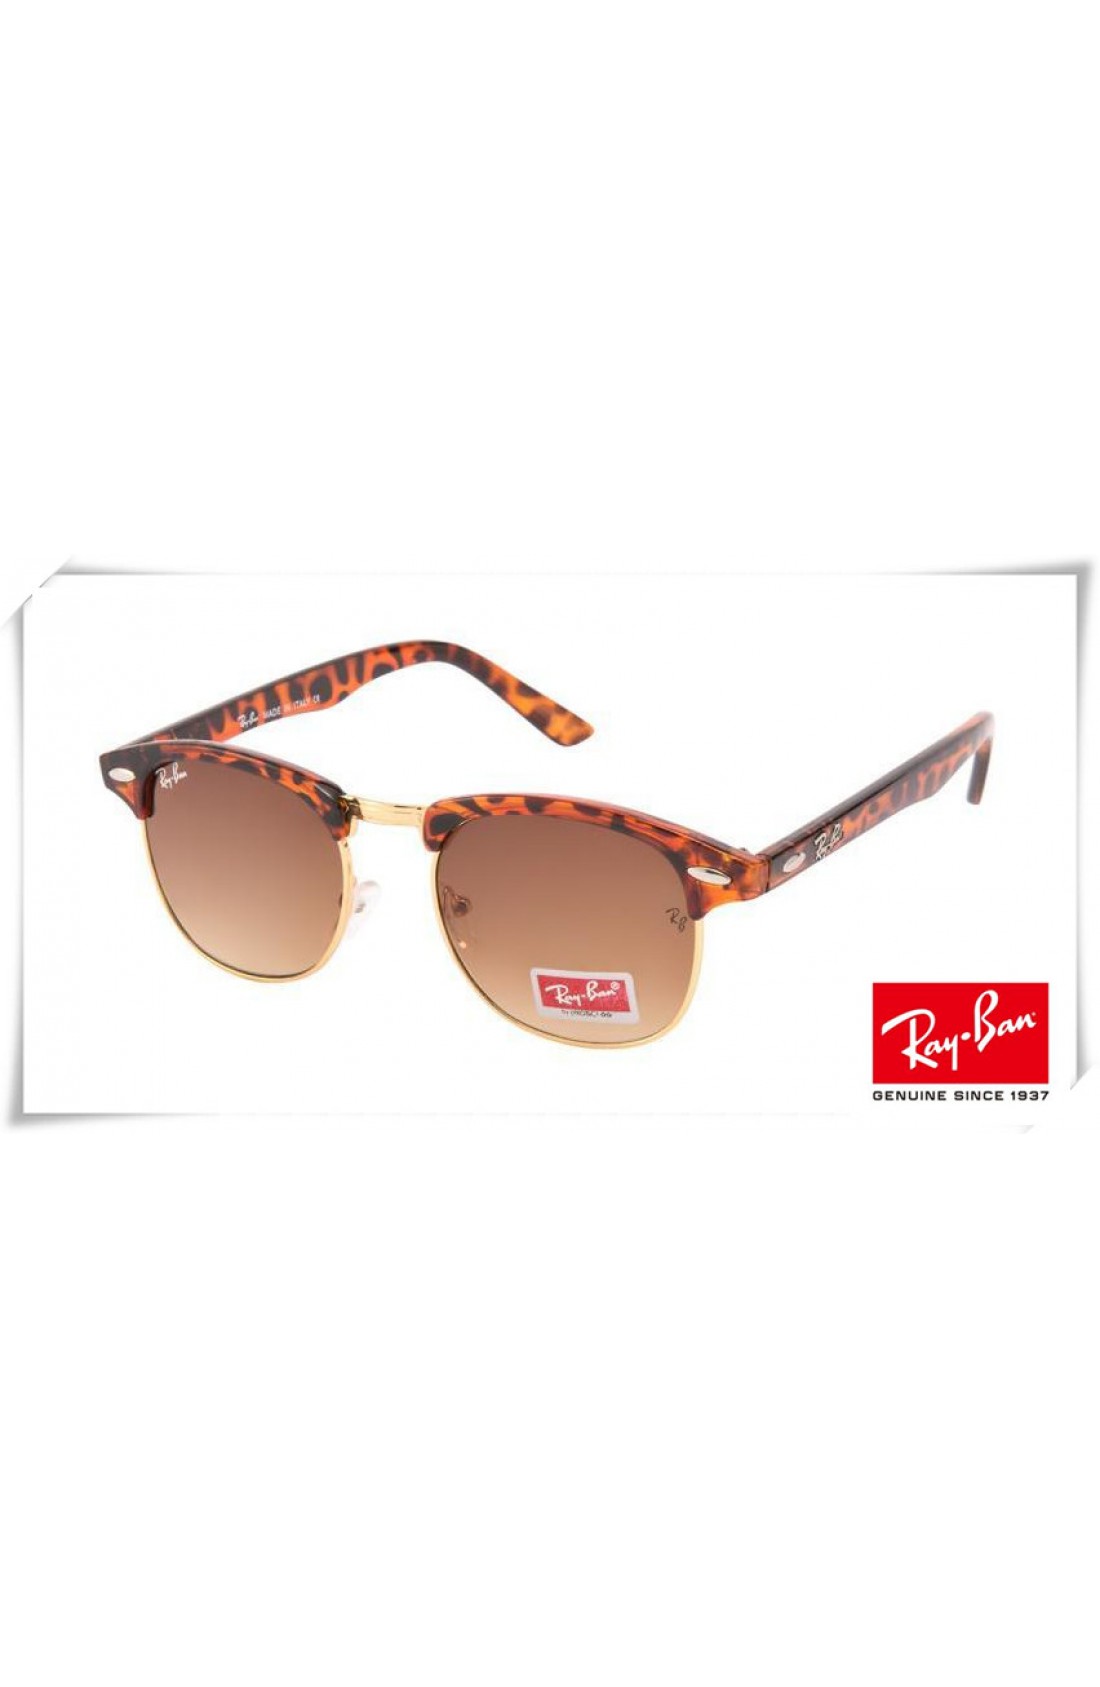 ray ban red frame glasses